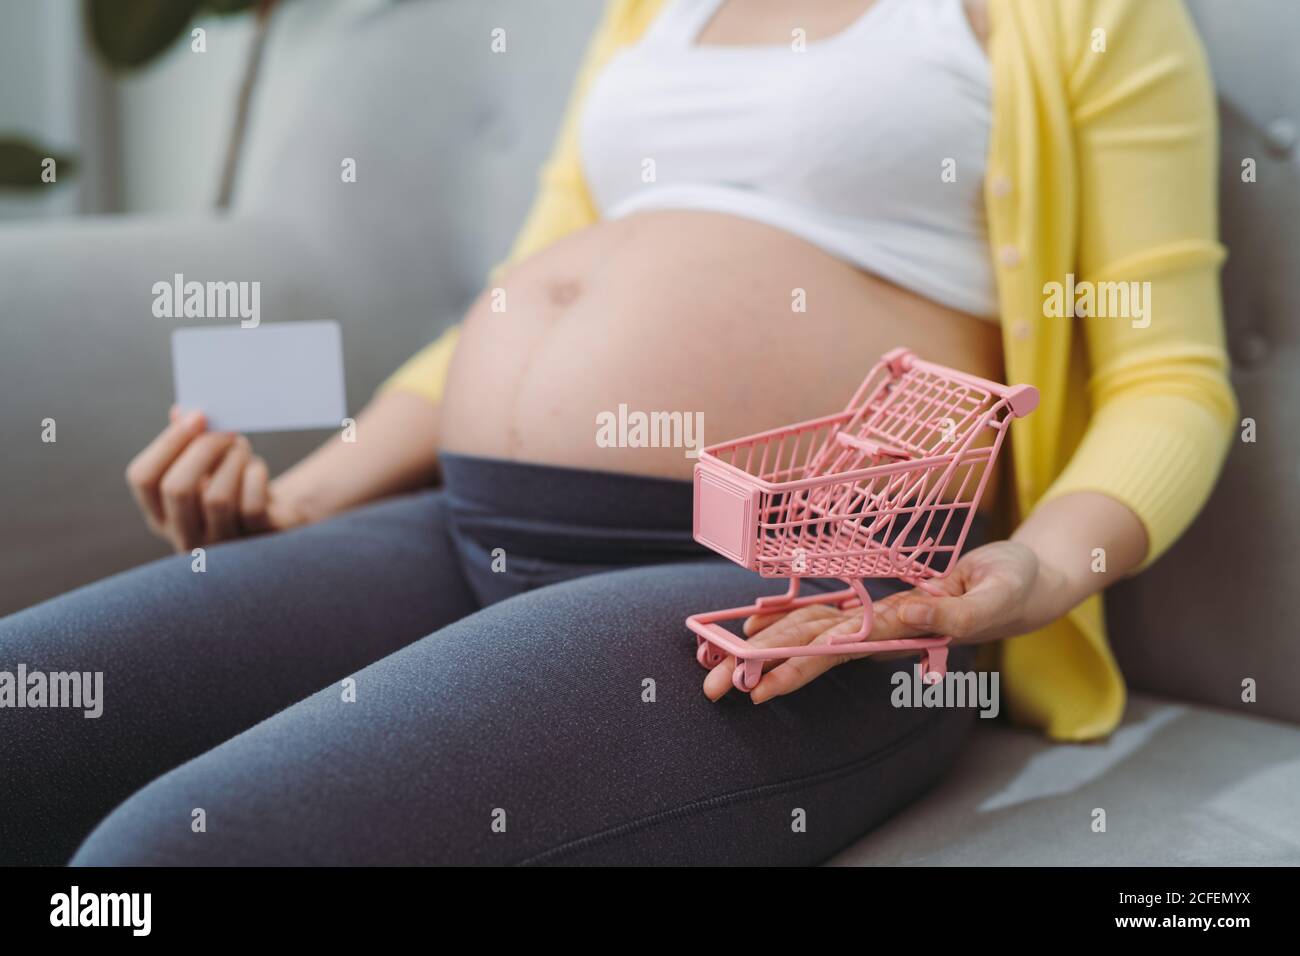 Pregnant woman preparing to buy baby products before birth, Holding shopping cart and credit card in front of the belly, Stock Photo